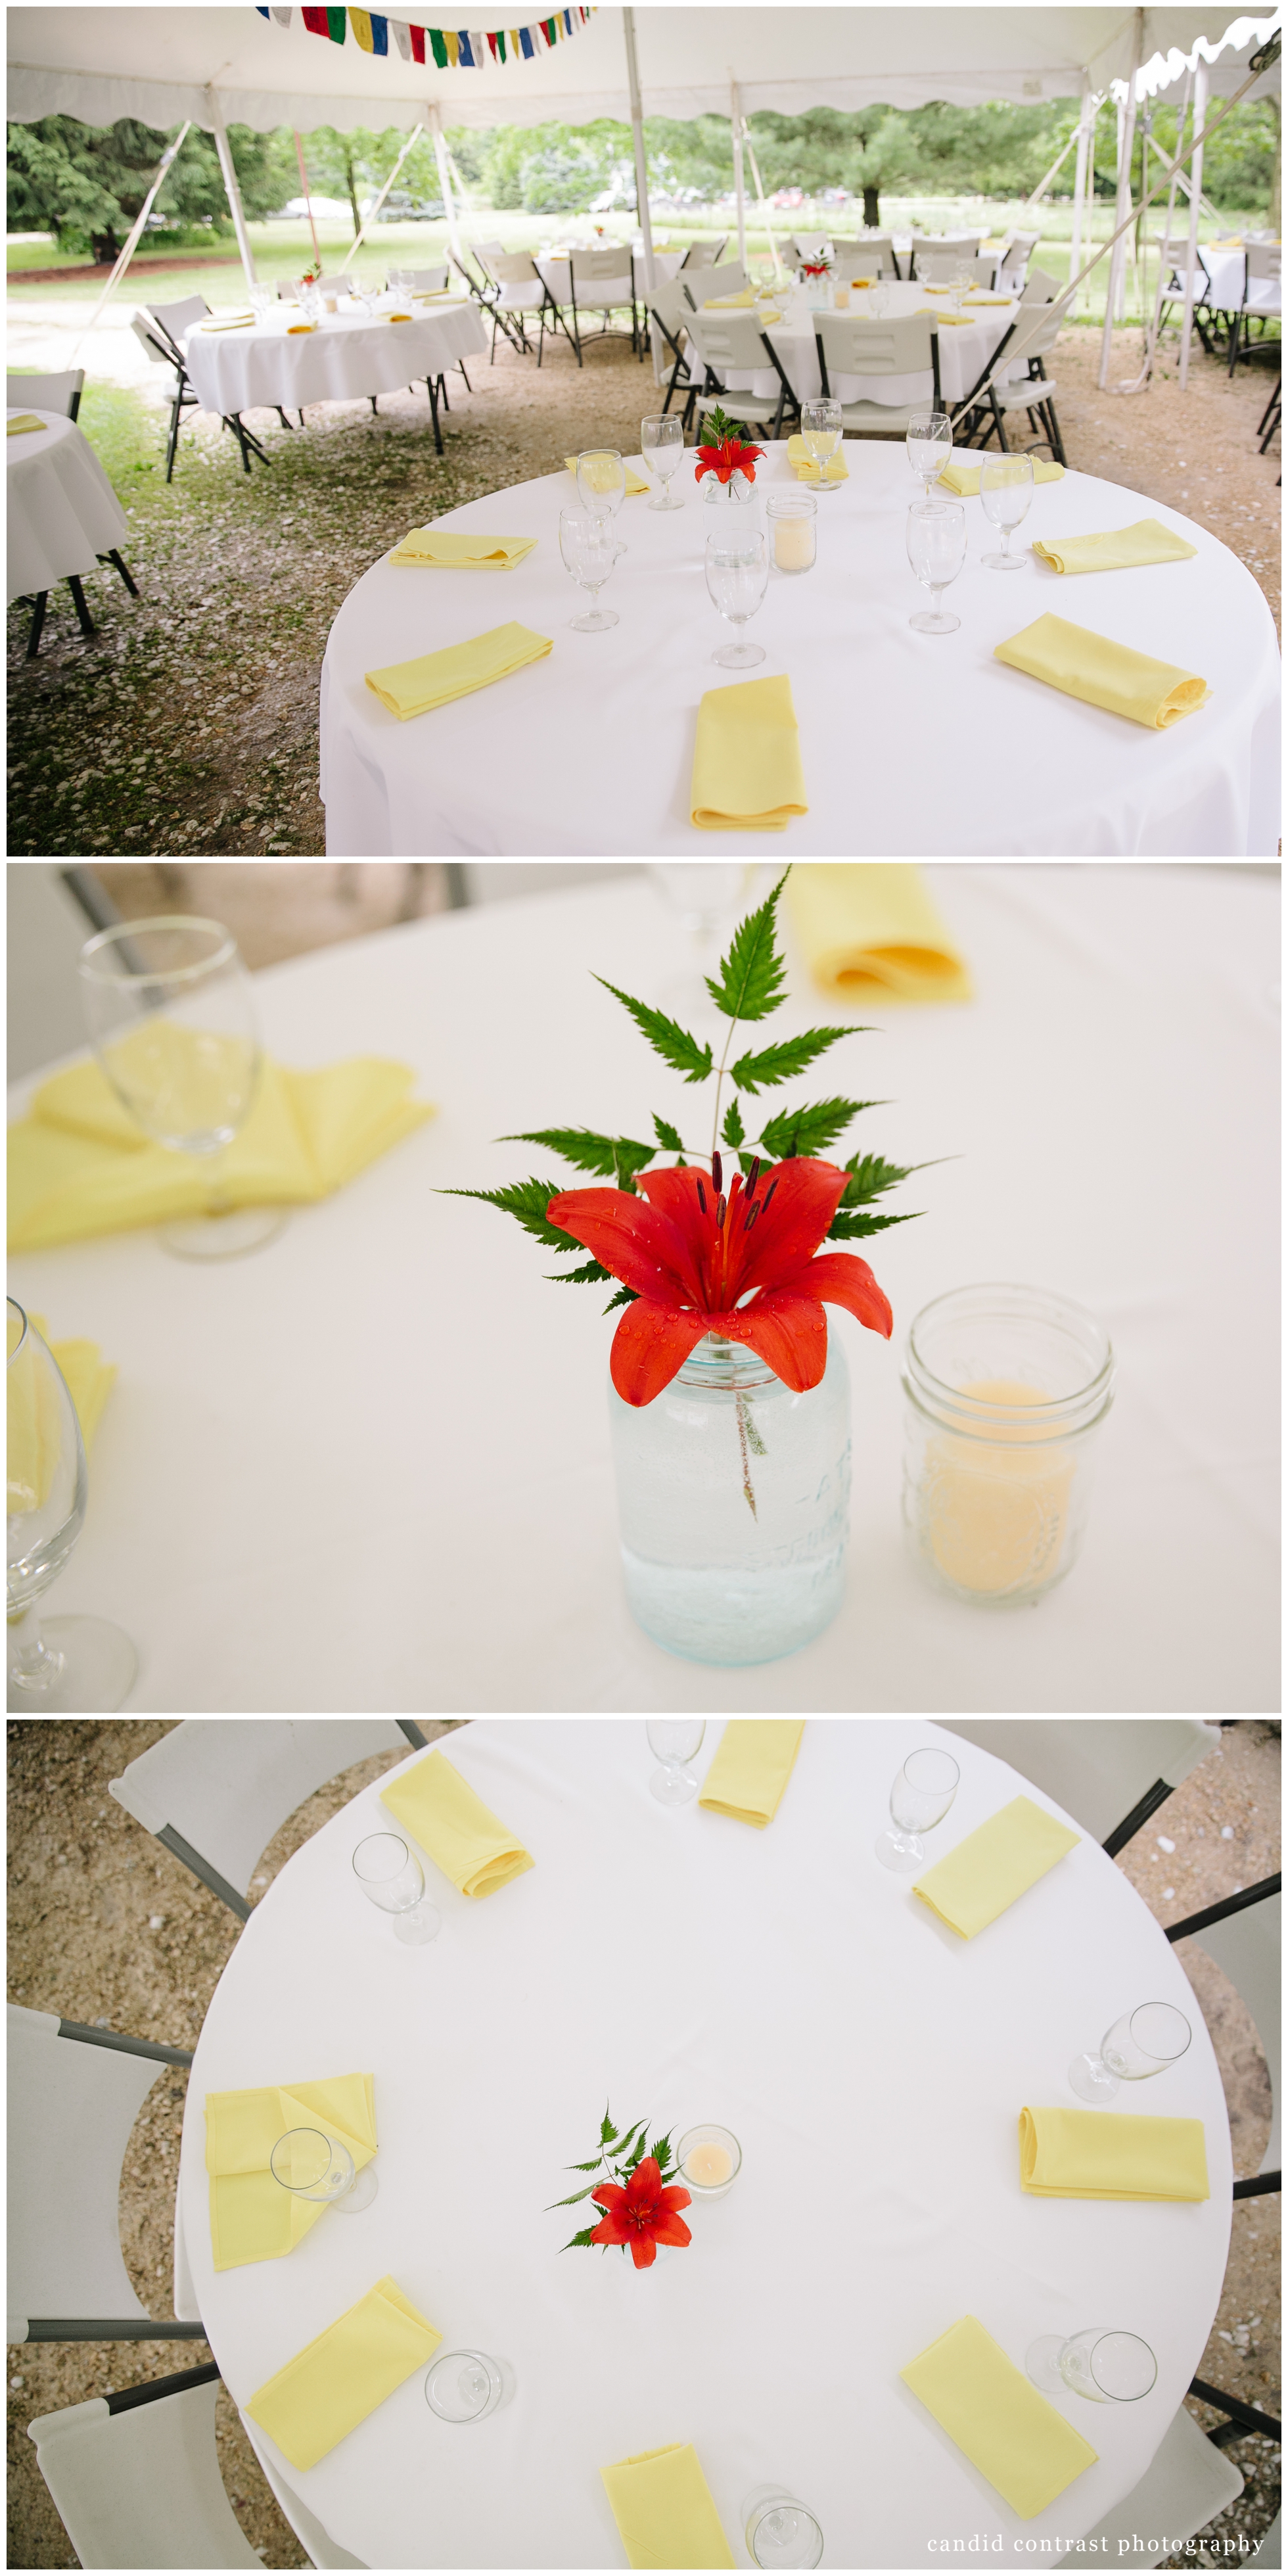 tent reception details at backyard wedding in dubuque, ia, candid contrast photography